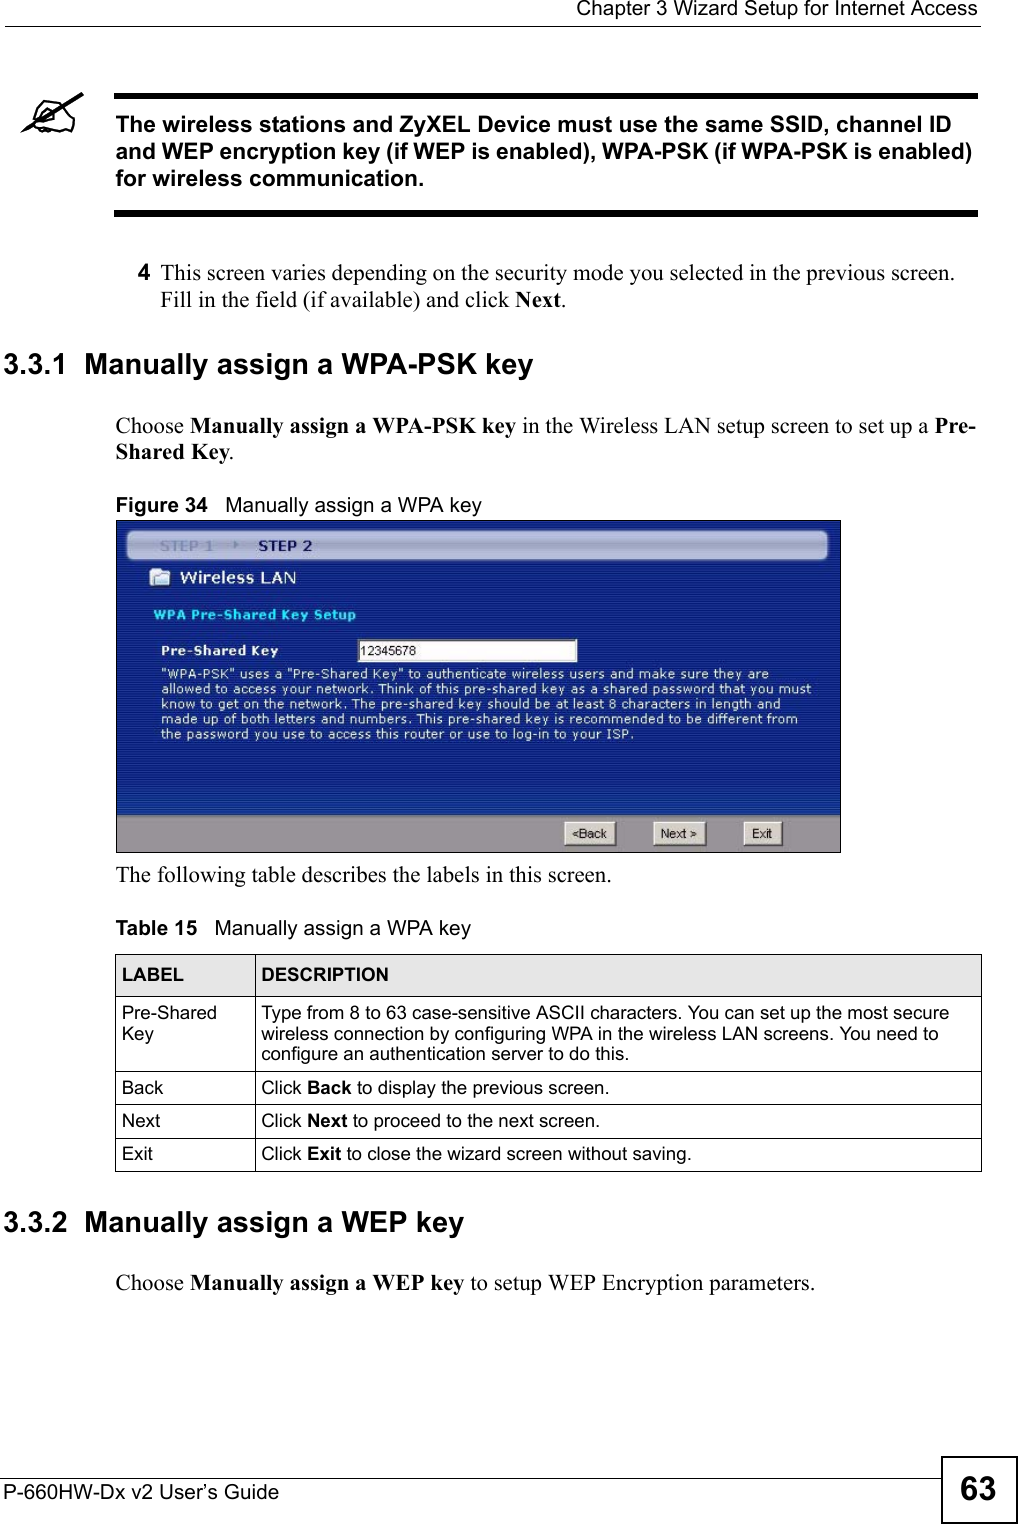  Chapter 3 Wizard Setup for Internet AccessP-660HW-Dx v2 User’s Guide 63&quot;The wireless stations and ZyXEL Device must use the same SSID, channel ID and WEP encryption key (if WEP is enabled), WPA-PSK (if WPA-PSK is enabled) for wireless communication.4This screen varies depending on the security mode you selected in the previous screen. Fill in the field (if available) and click Next.3.3.1  Manually assign a WPA-PSK keyChoose Manually assign a WPA-PSK key in the Wireless LAN setup screen to set up a Pre-Shared Key.Figure 34   Manually assign a WPA keyThe following table describes the labels in this screen. 3.3.2  Manually assign a WEP keyChoose Manually assign a WEP key to setup WEP Encryption parameters.Table 15   Manually assign a WPA keyLABEL DESCRIPTIONPre-Shared KeyType from 8 to 63 case-sensitive ASCII characters. You can set up the most secure wireless connection by configuring WPA in the wireless LAN screens. You need to configure an authentication server to do this.Back Click Back to display the previous screen.Next Click Next to proceed to the next screen. Exit Click Exit to close the wizard screen without saving.